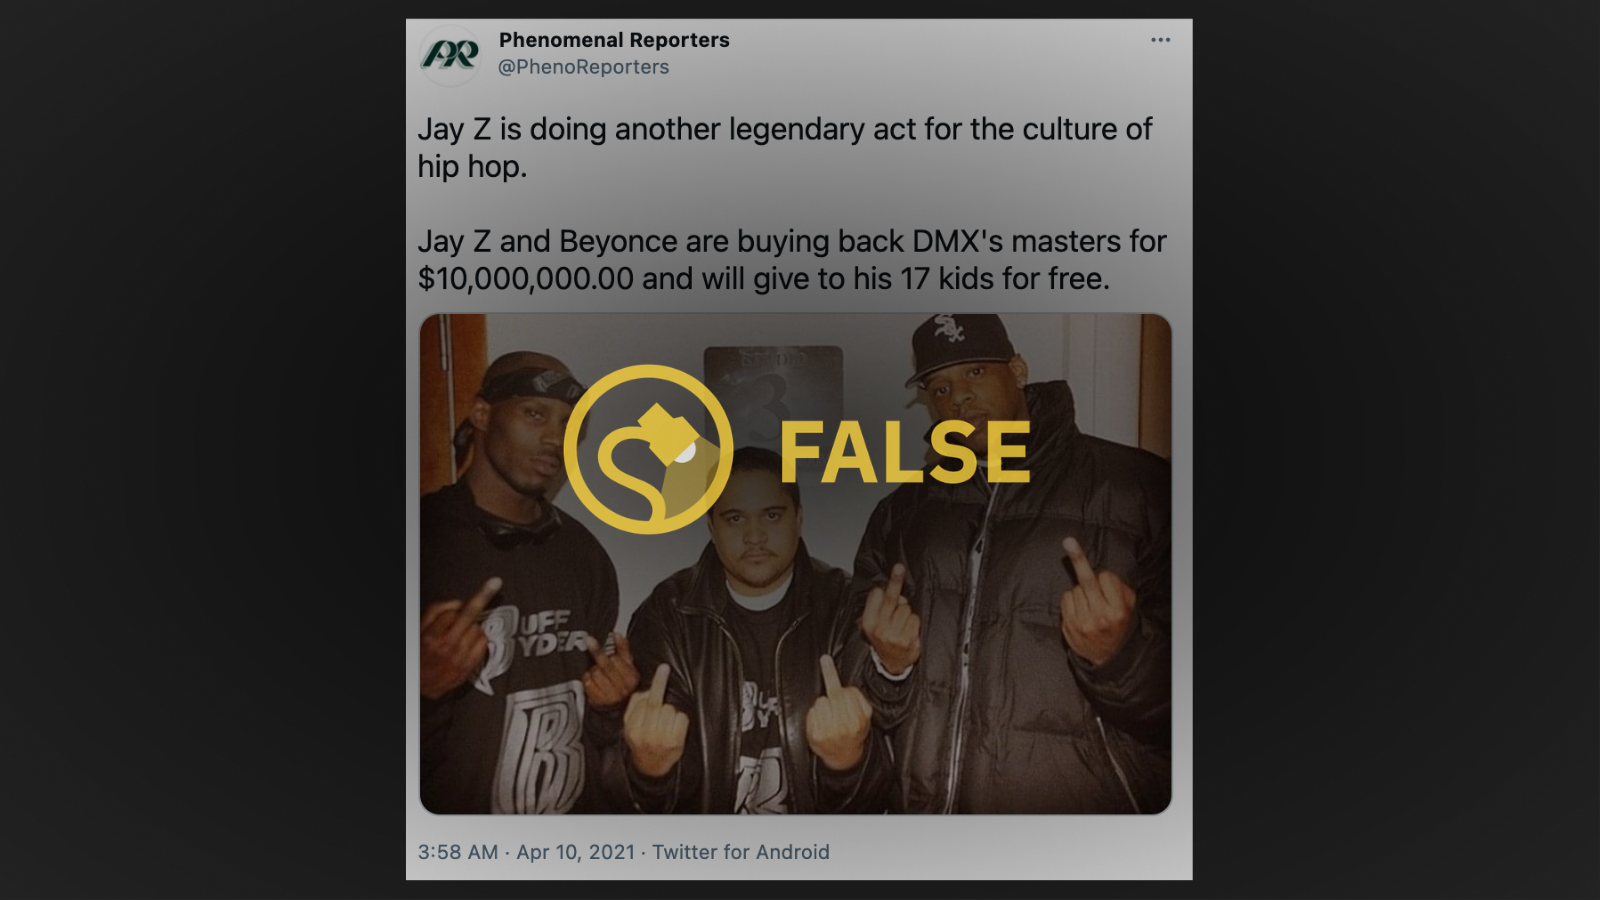 Did Jay-Z Buy DMX’s Masters to Give to His 17 Kids?